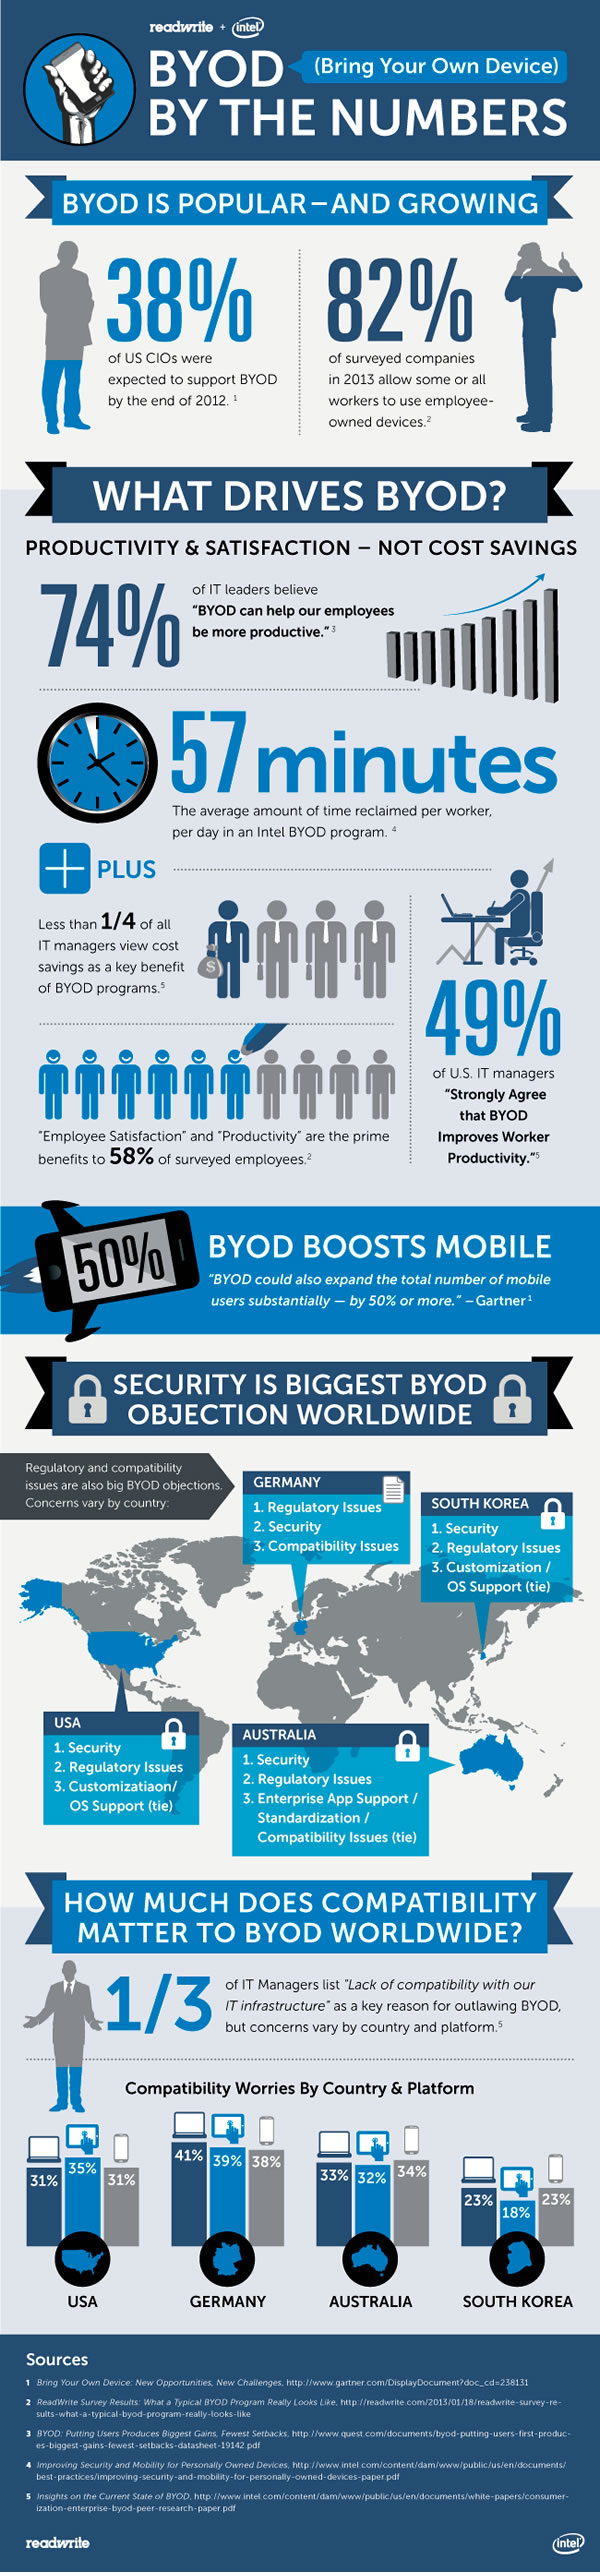 BYOD Roundup Lots of "Bring Your Own Device" Stats Global Nerdy